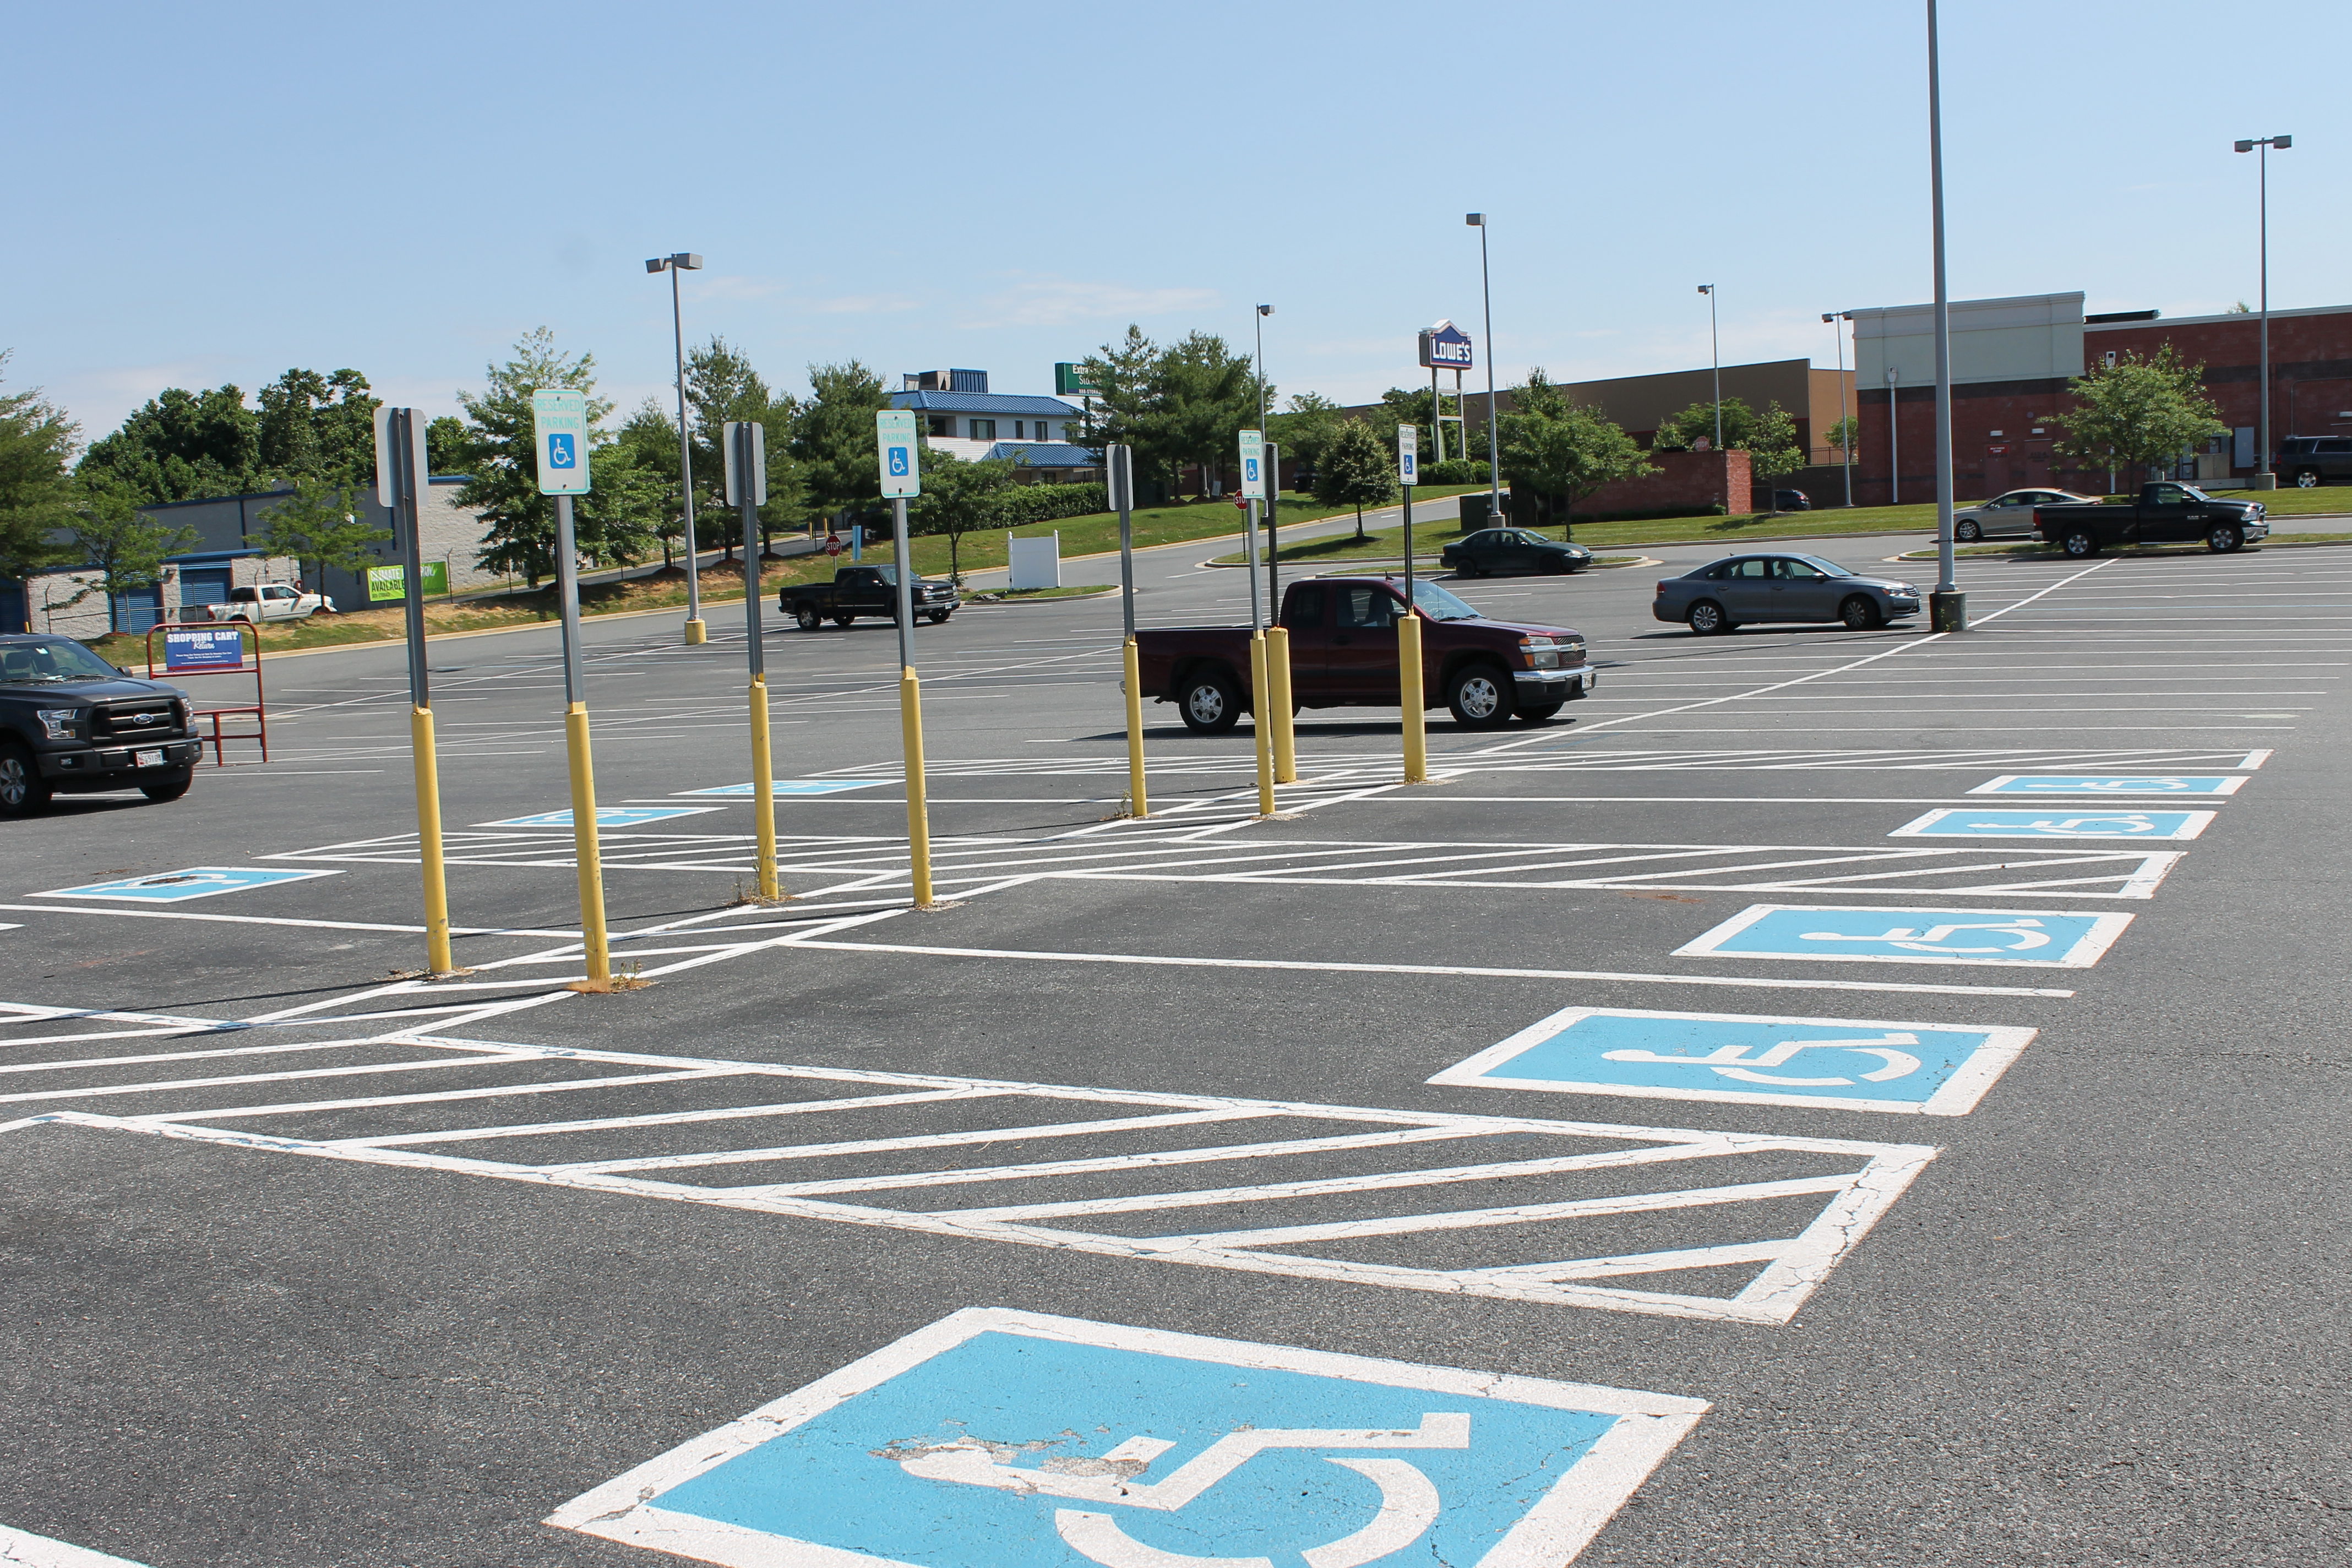 Photo shows a row of accessible parking spaces.